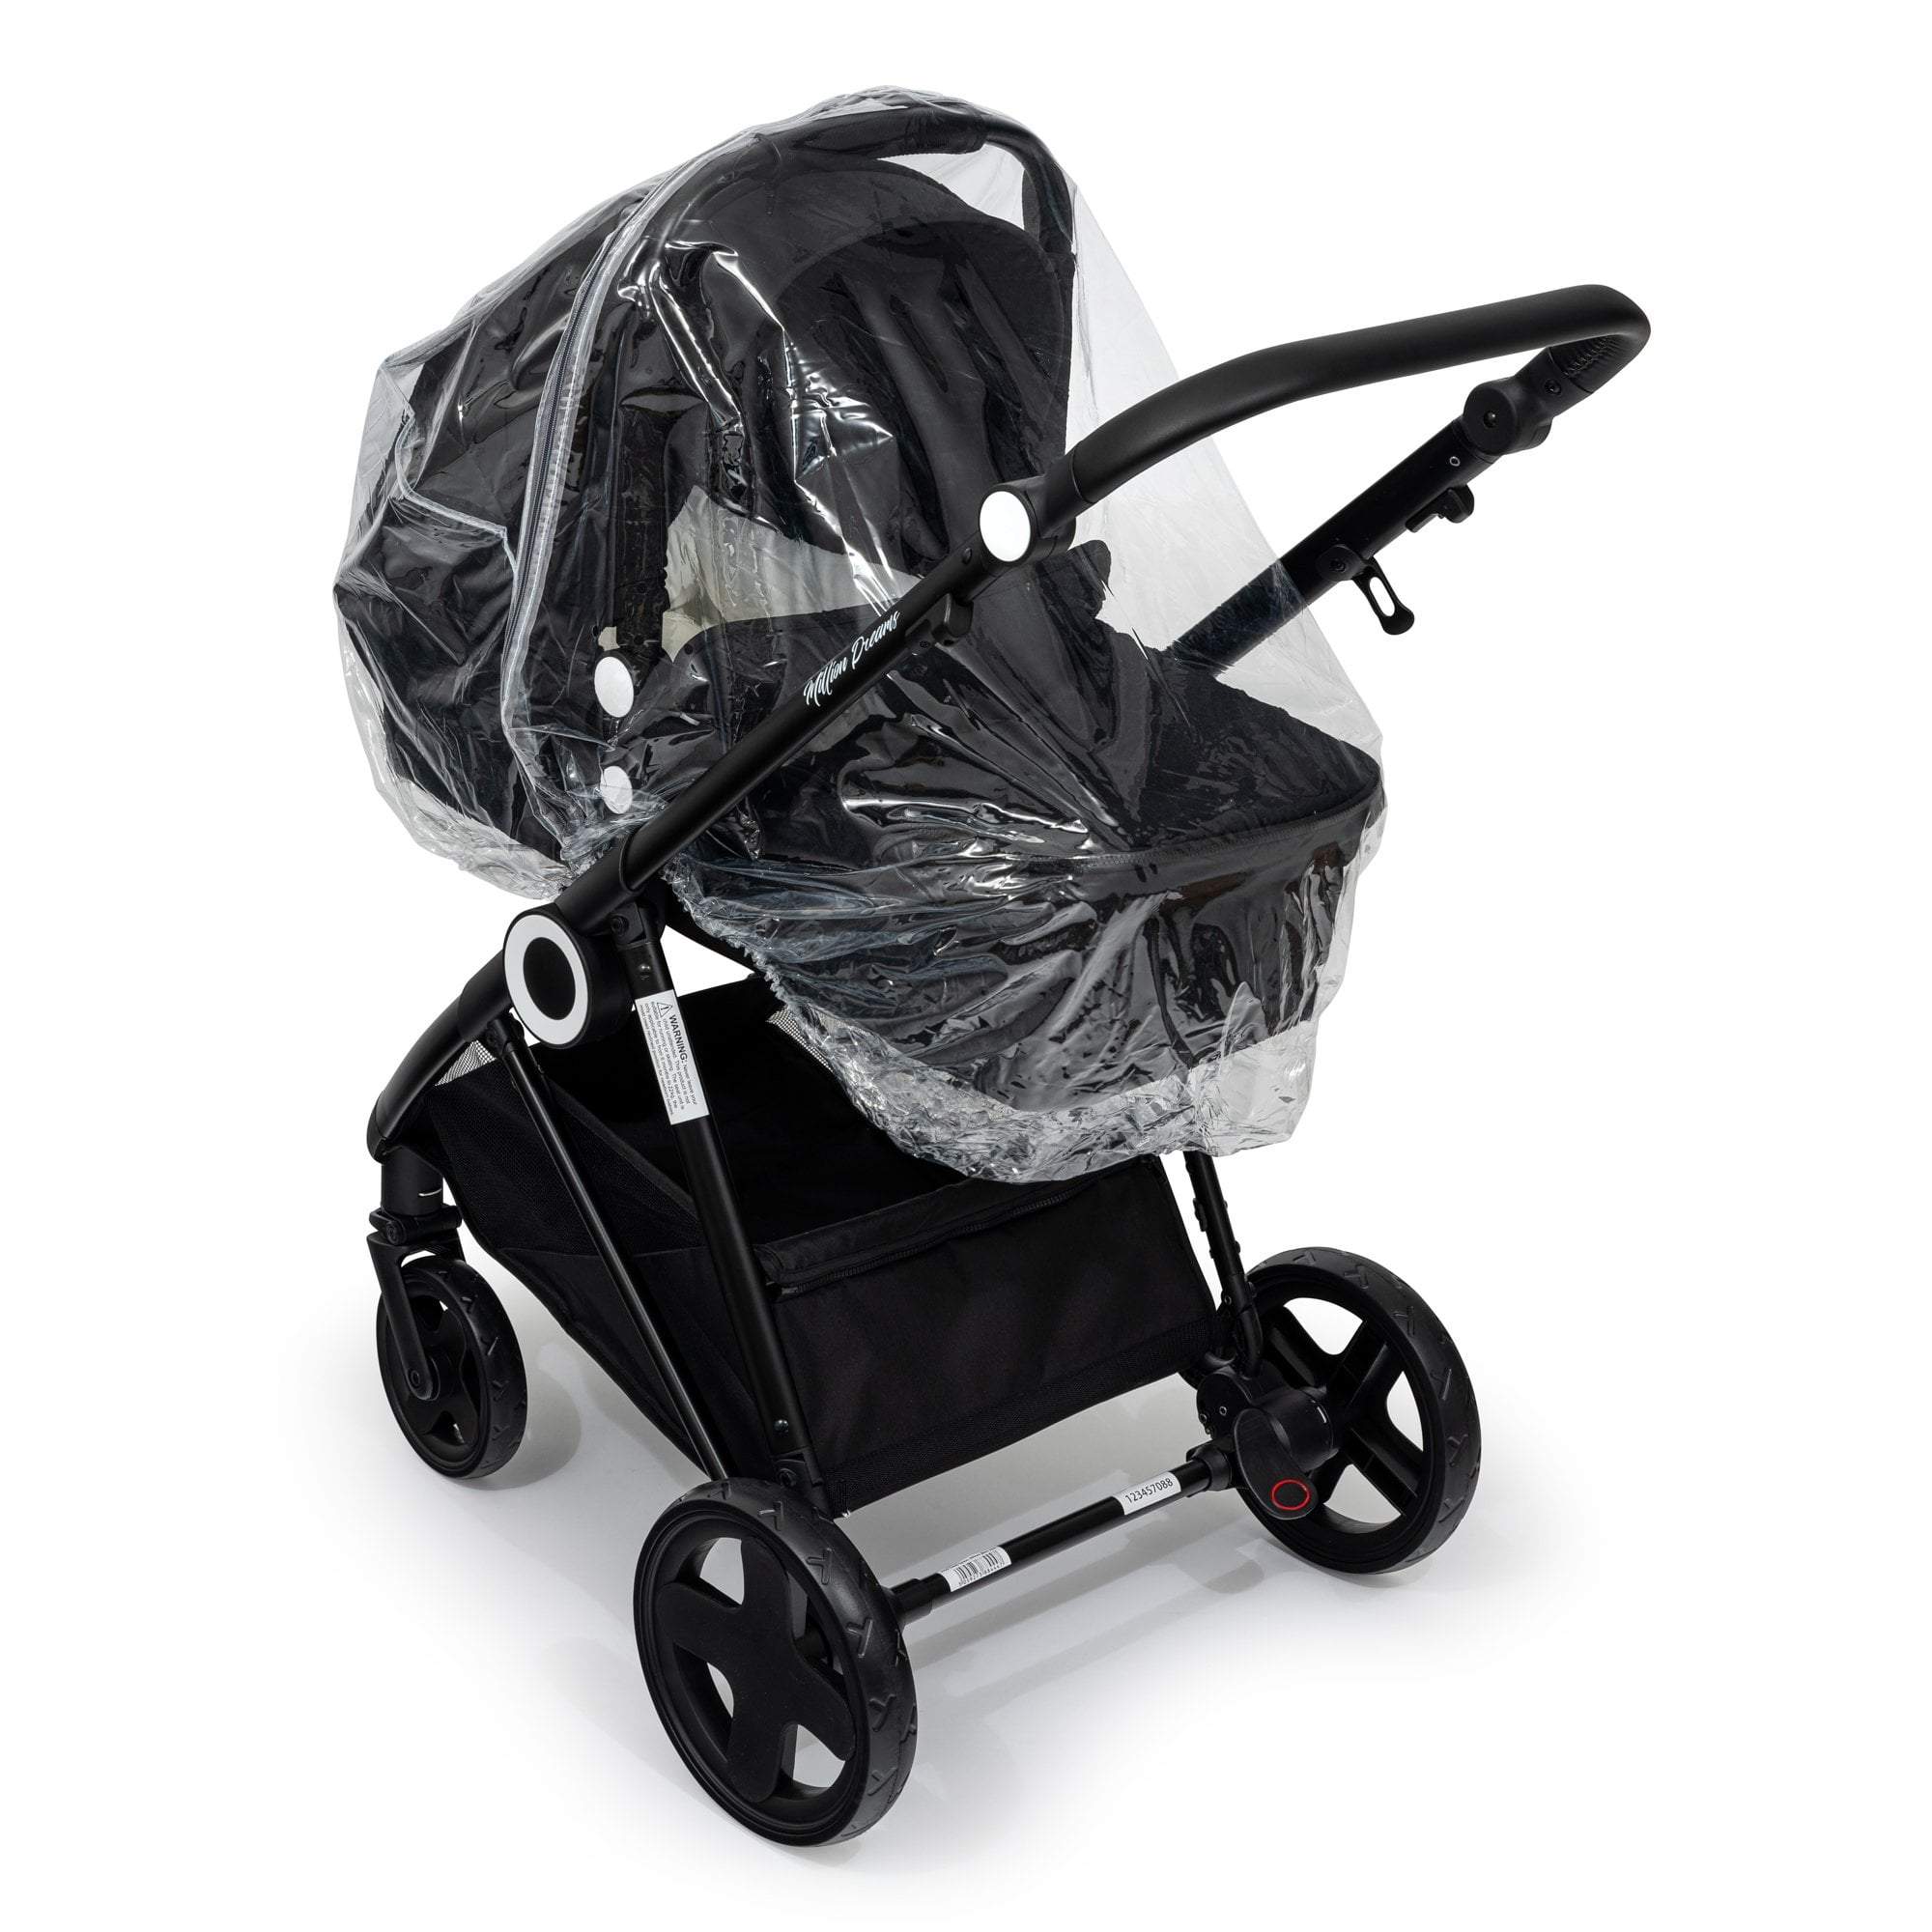 Carrycot Raincover Compatible With Uppababy - Fits All Models - For Your Little One